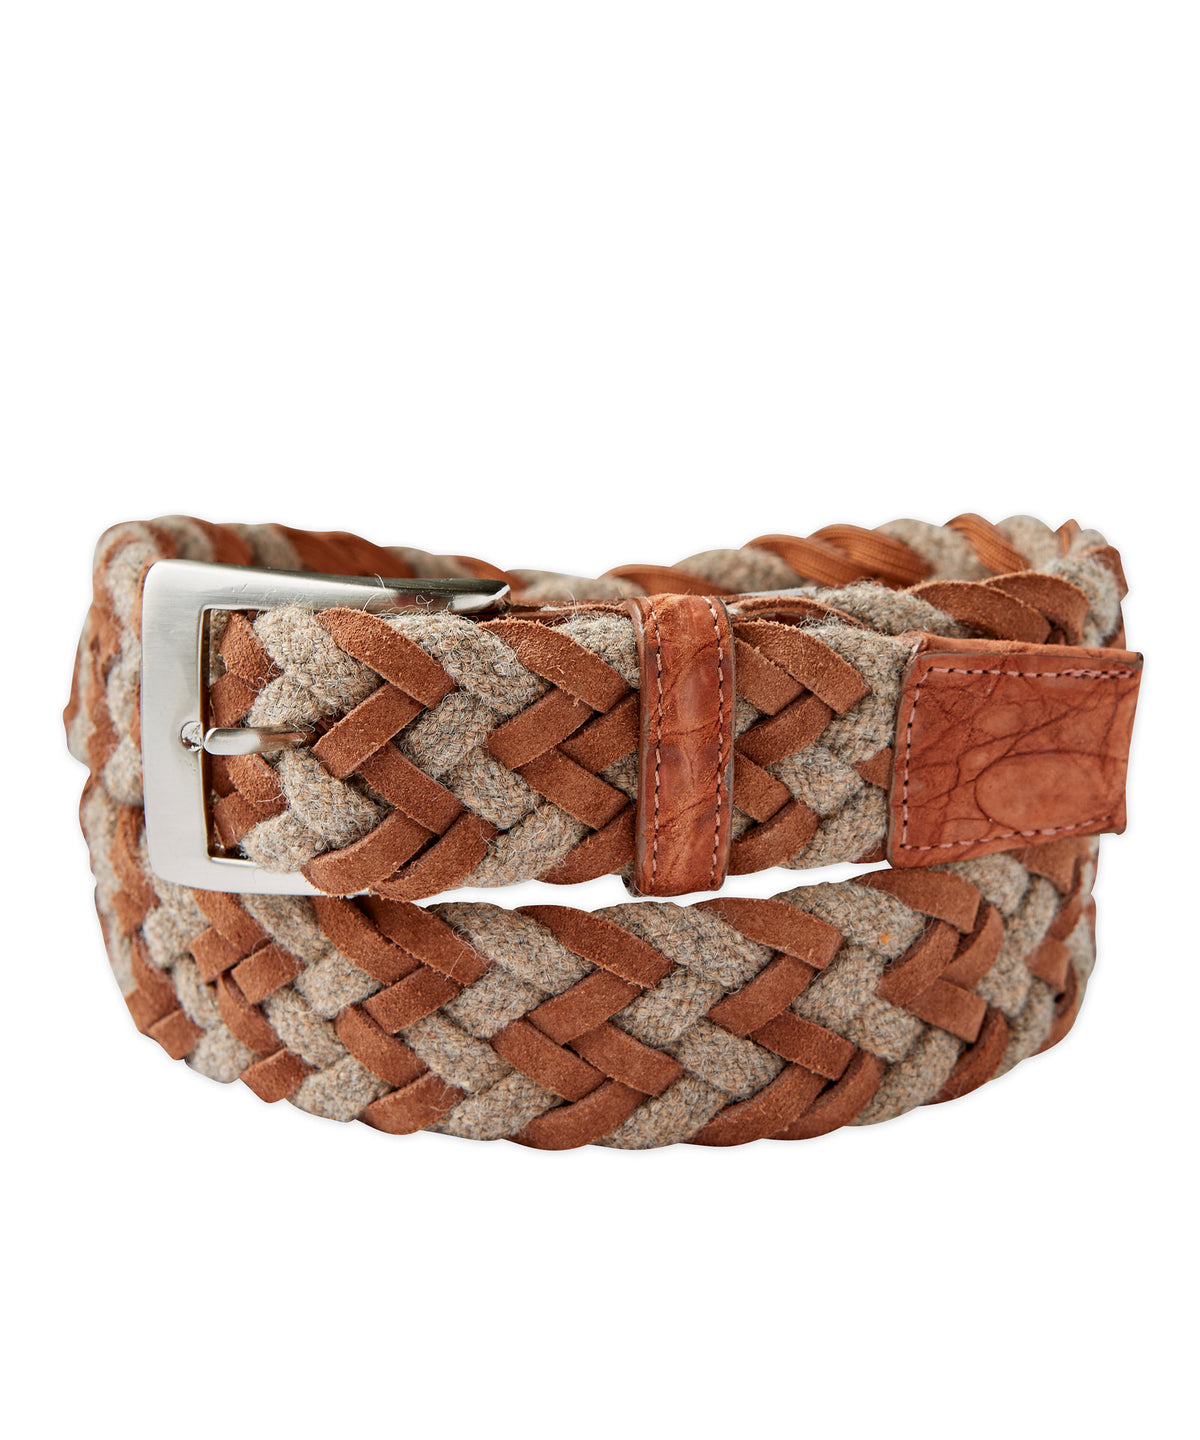 Woven Fabric Belt with Croc Tabs